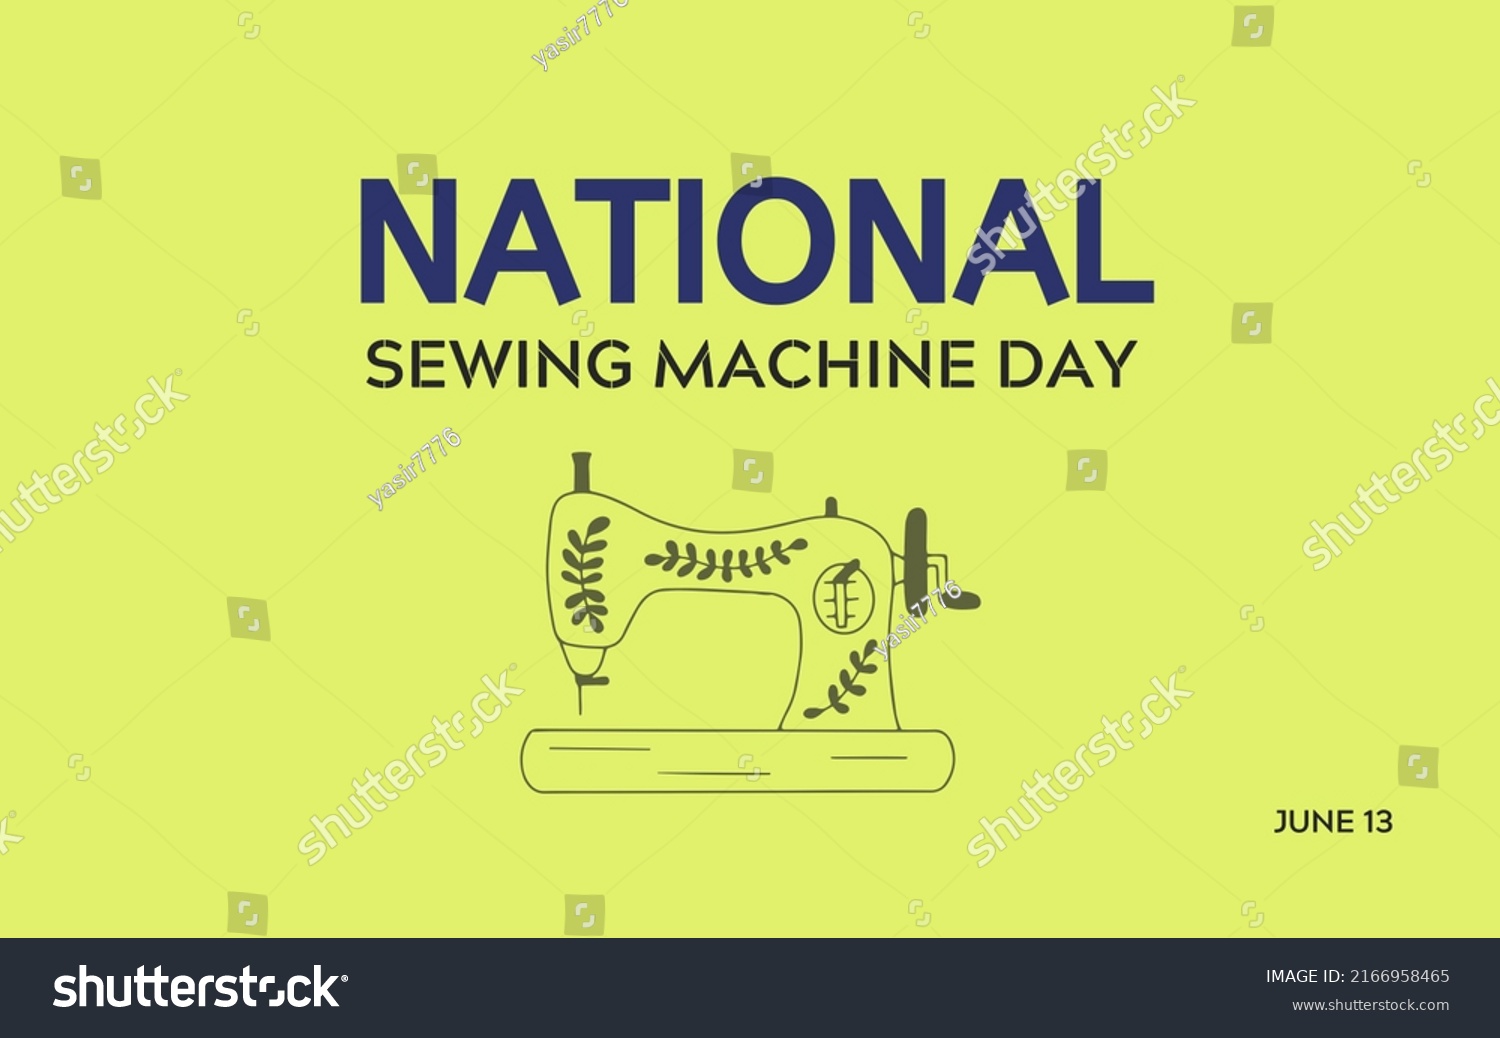 National Sewing Machine Day On June Stock Illustration 2166958465